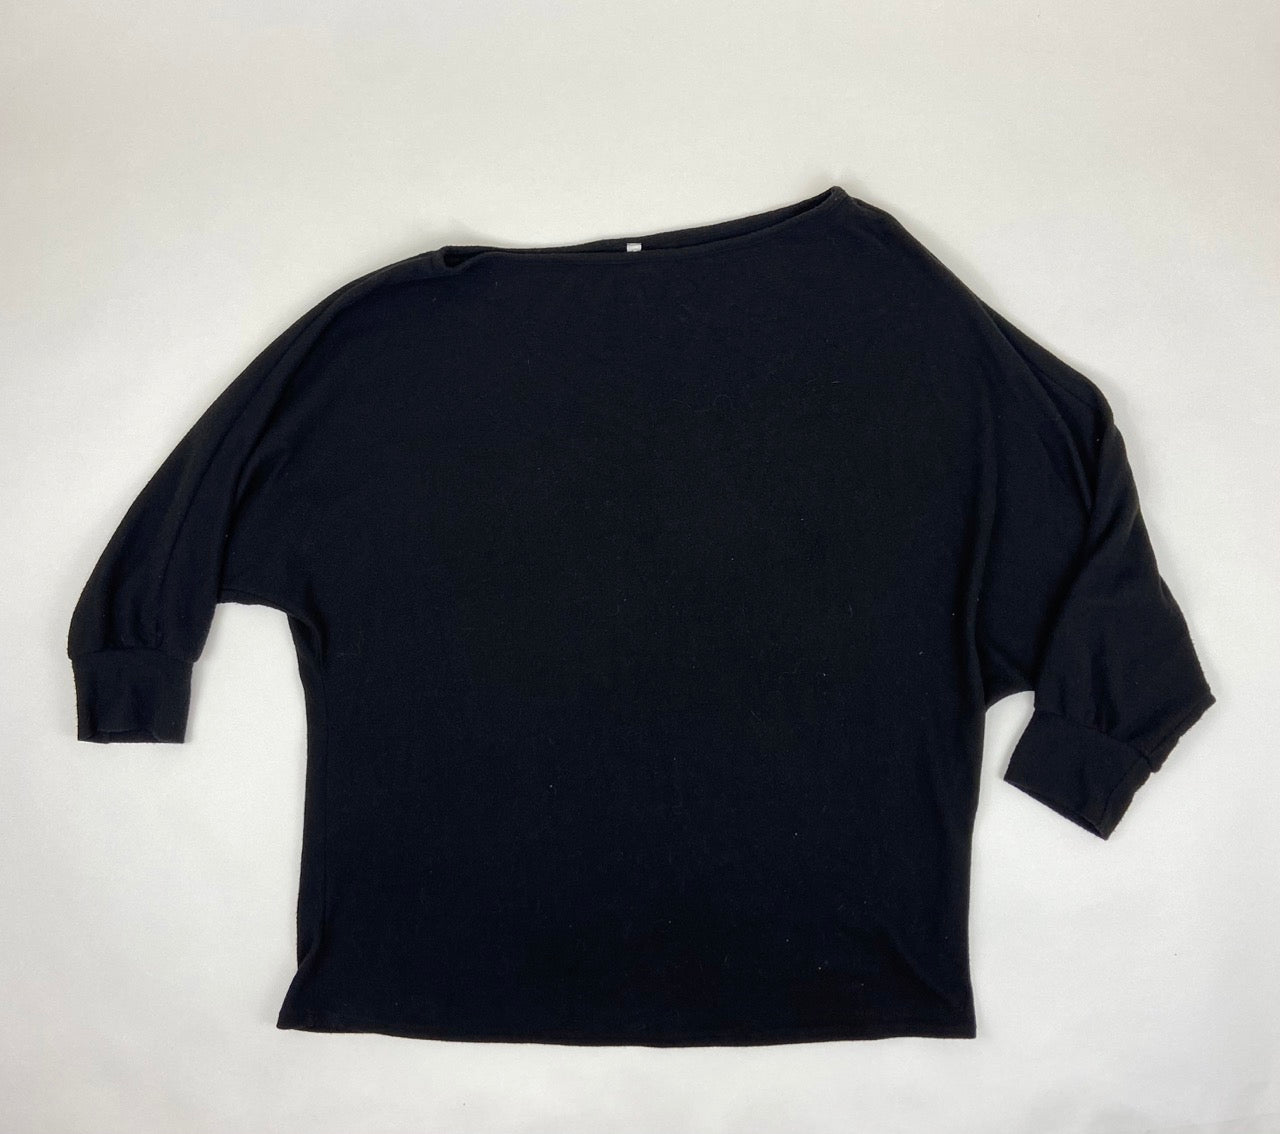 Cozy Black Off The Shoulder Sweater- 3X